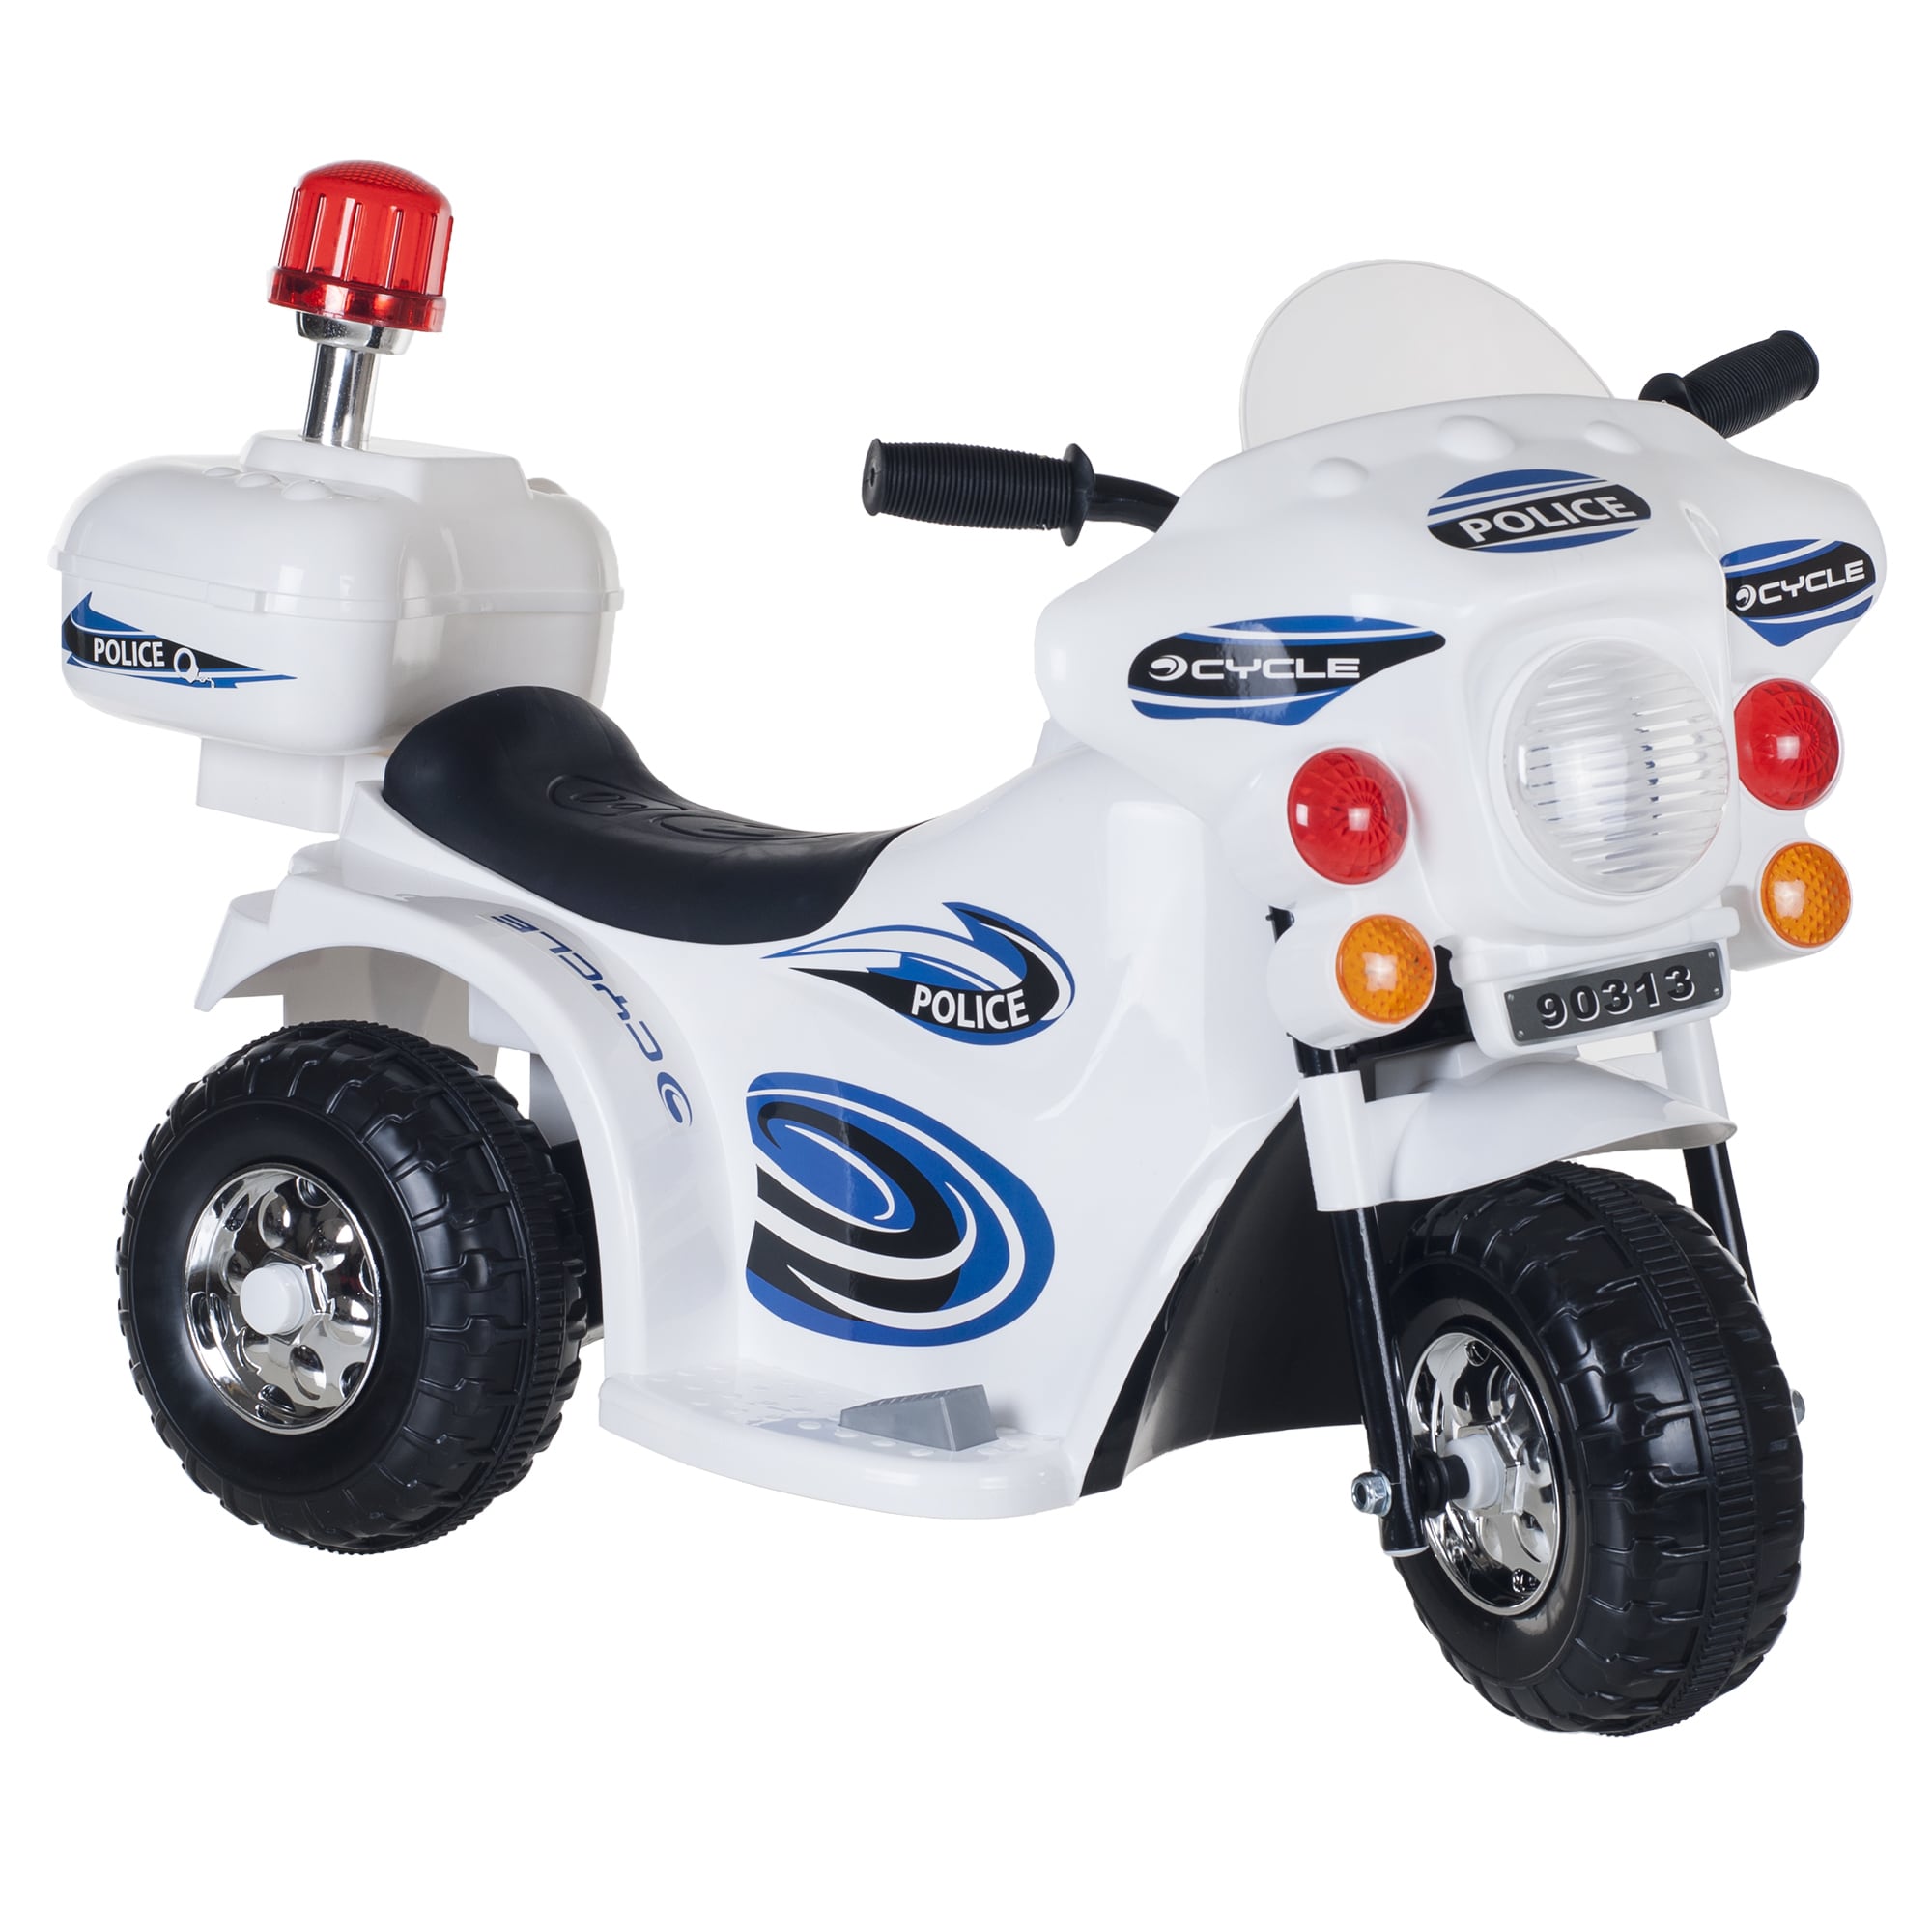 motorcycle kids toy